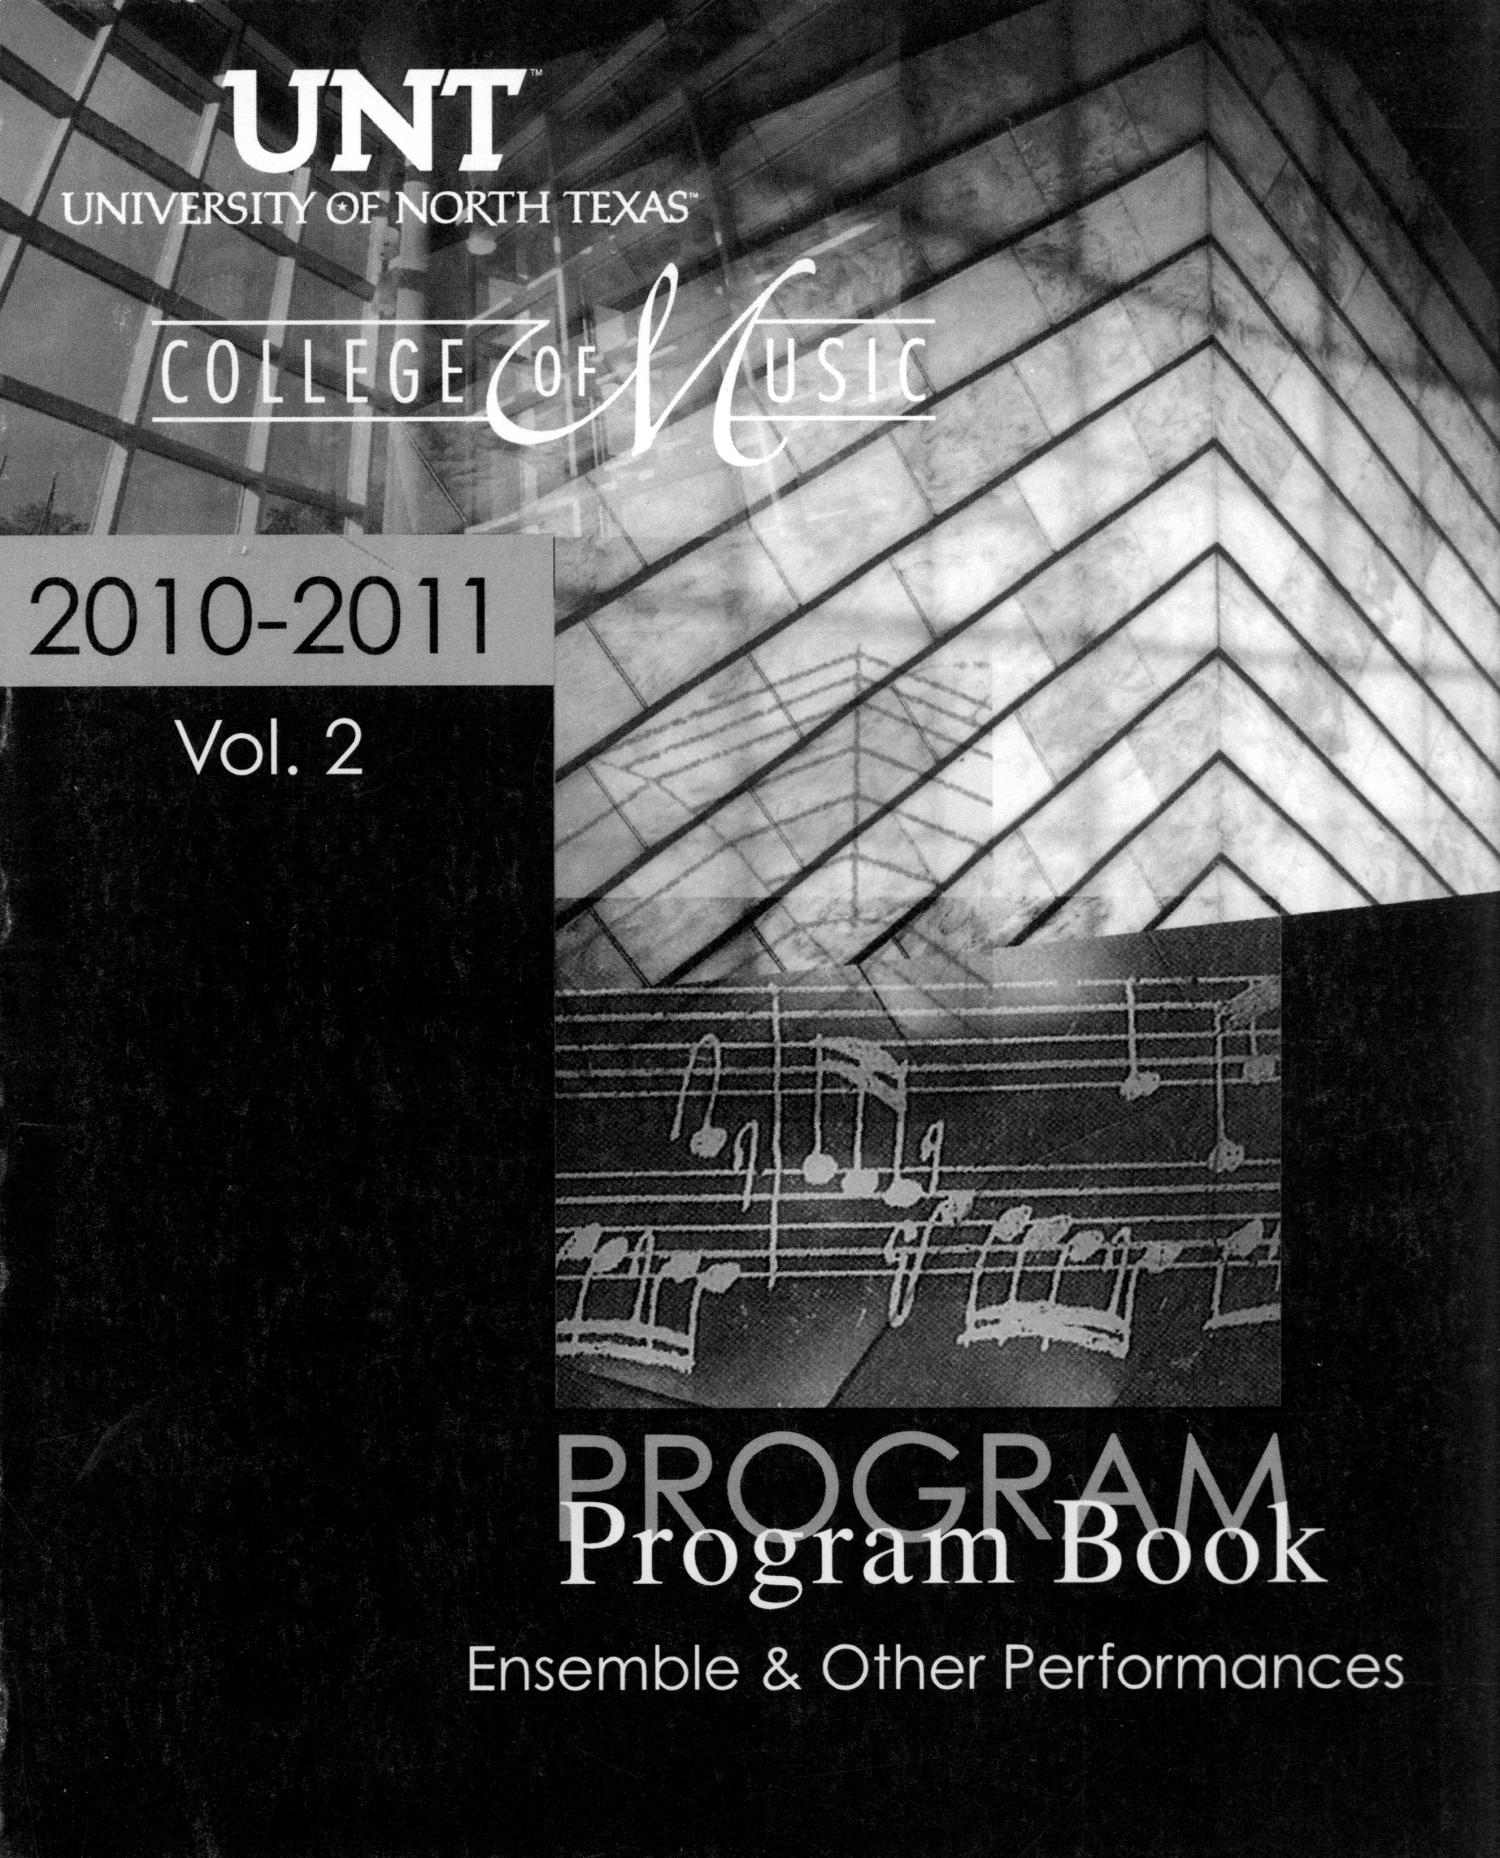 College of Music Program Book 2010-2011: Ensemble & Other Performances, Volume 2
                                                
                                                    Front Cover
                                                